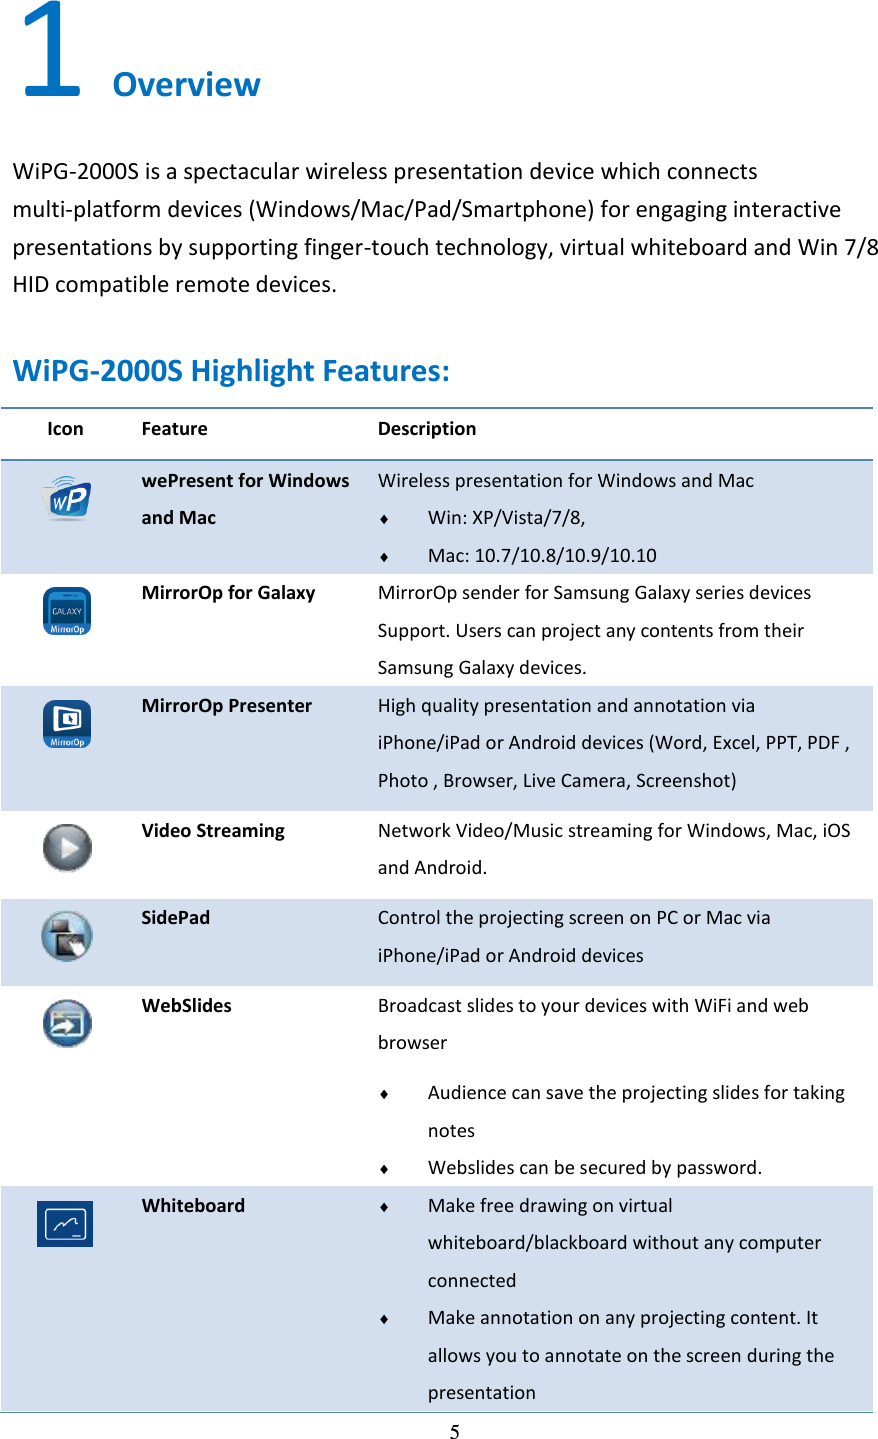   5 1 Overview WiPG-2000S is a spectacular wireless presentation device which connects multi-platform devices (Windows/Mac/Pad/Smartphone) for engaging interactive presentations by supporting finger-touch technology, virtual whiteboard and Win 7/8 HID compatible remote devices.   WiPG-2000S Highlight Features: Icon Feature Description  wePresent for Windows and Mac Wireless presentation for Windows and Mac    Win: XP/Vista/7/8,    Mac: 10.7/10.8/10.9/10.10  MirrorOp for Galaxy MirrorOp sender for Samsung Galaxy series devices Support. Users can project any contents from their Samsung Galaxy devices.  MirrorOp Presenter High quality presentation and annotation via iPhone/iPad or Android devices (Word, Excel, PPT, PDF , Photo , Browser, Live Camera, Screenshot)  Video Streaming Network Video/Music streaming for Windows, Mac, iOS and Android.    SidePad Control the projecting screen on PC or Mac via iPhone/iPad or Android devices  WebSlides Broadcast slides to your devices with WiFi and web browser  Audience can save the projecting slides for taking notes  Webslides can be secured by password.  Whiteboard  Make free drawing on virtual whiteboard/blackboard without any computer connected  Make annotation on any projecting content. It allows you to annotate on the screen during the presentation 